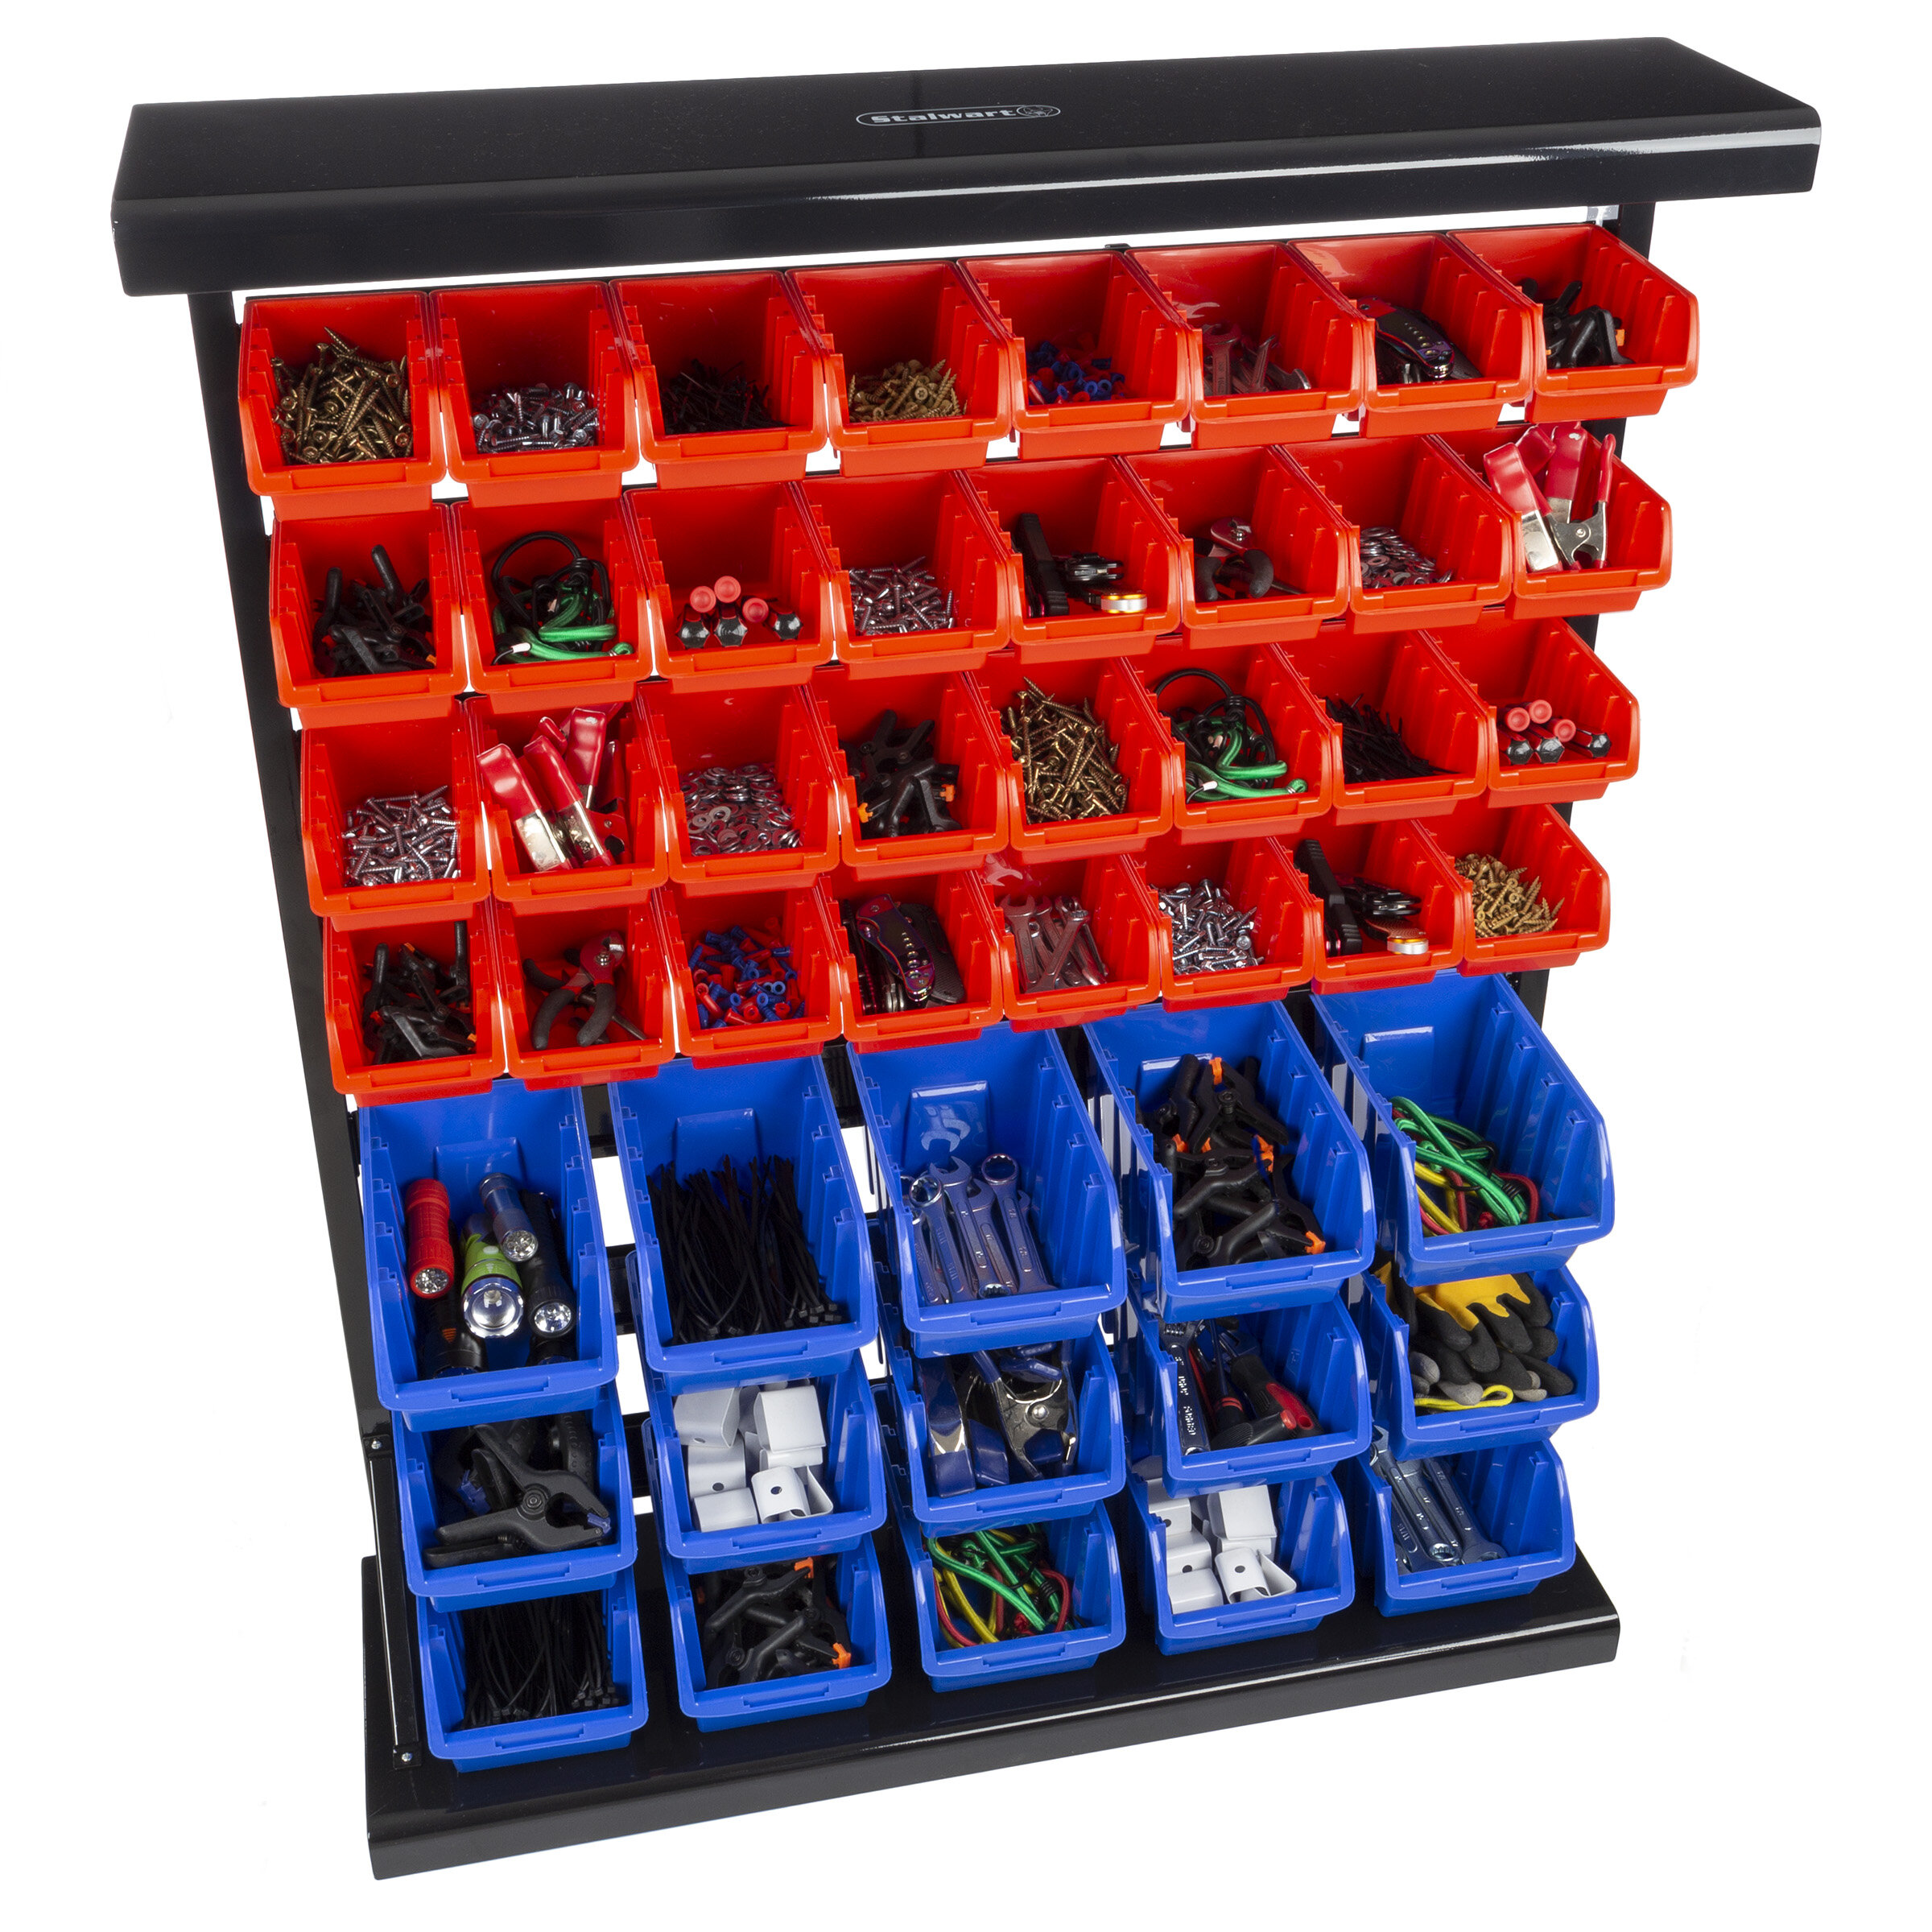 Stalwart 47 Bin Tool Organizer - Wall Mountable Container for Garage  Organization by Stalwart (Red/Blue) & Reviews